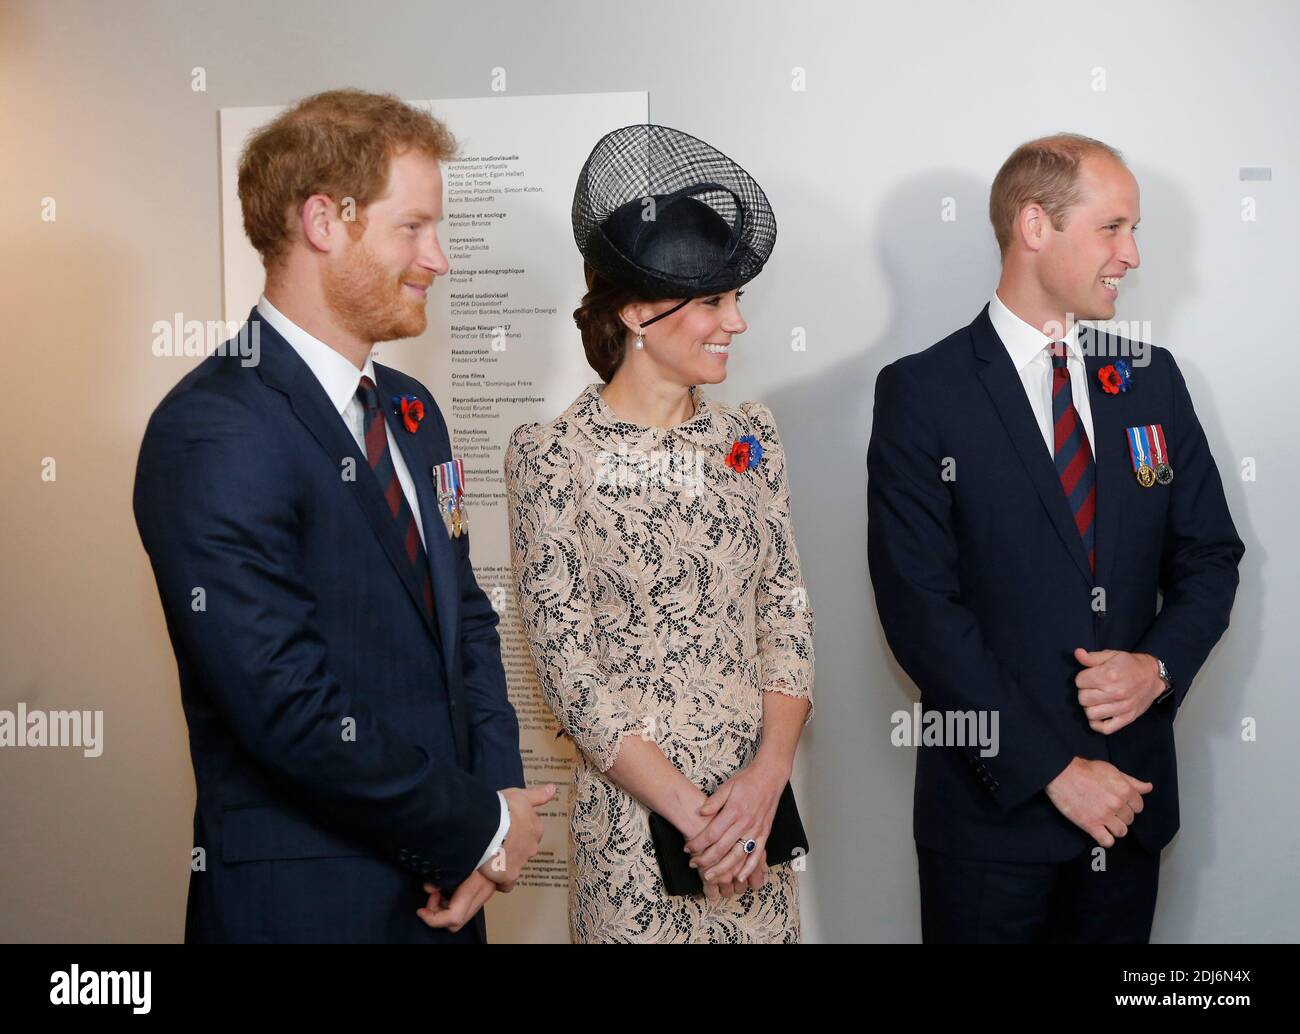 Britain's Prince William, the Duke of Cambridge, his wife Kate, the Duchess of Cambridge, and Prince Harry, left, share a laugh with France President, Francois Hollande, while visiting a museum inside the World War I Thiepval Monument prior to the Somme centenary commemorations in Thiepval, northern France, Friday, July 1st, 2016. One week after Britain's vote to leave the European Union, Prime Minister David Cameron and royal family members will stand side-by-side with France's President to celebrate their historic alliance at the centenary of the deadliest battle of World War I. Photo by Fra Stock Photo